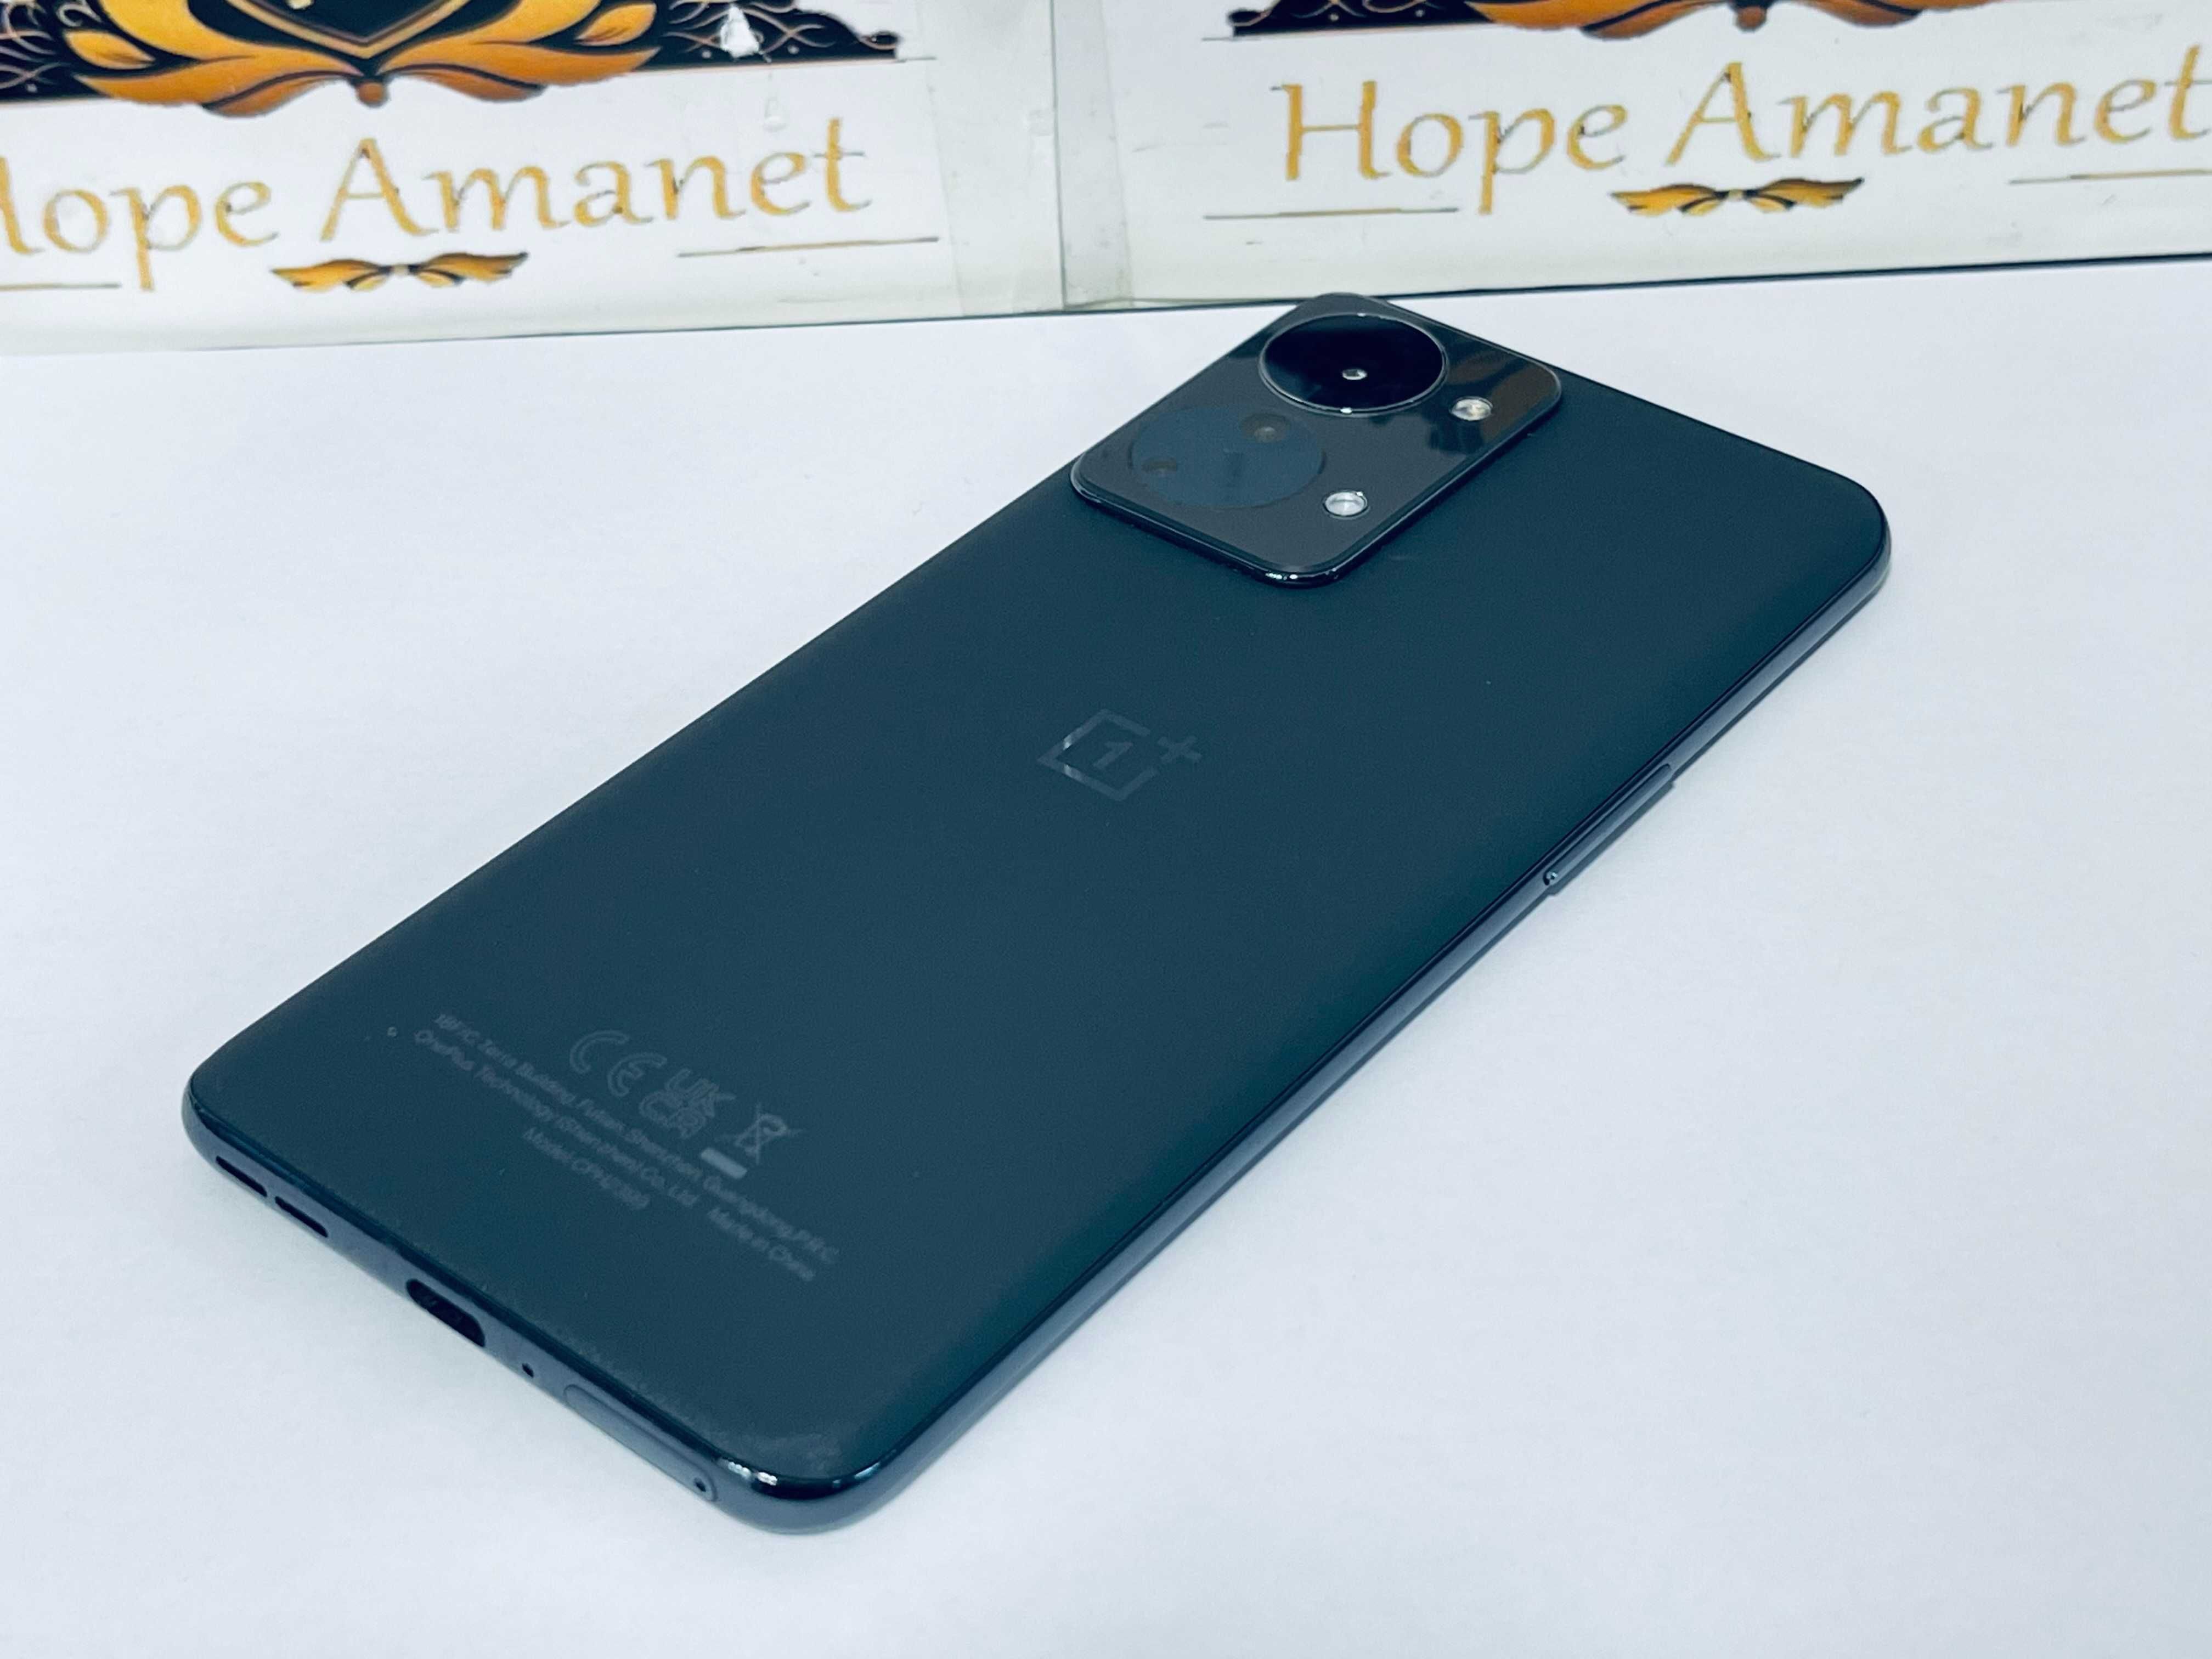 Hope Amanet P10/OnePlus Nord 2T 5G 128GB